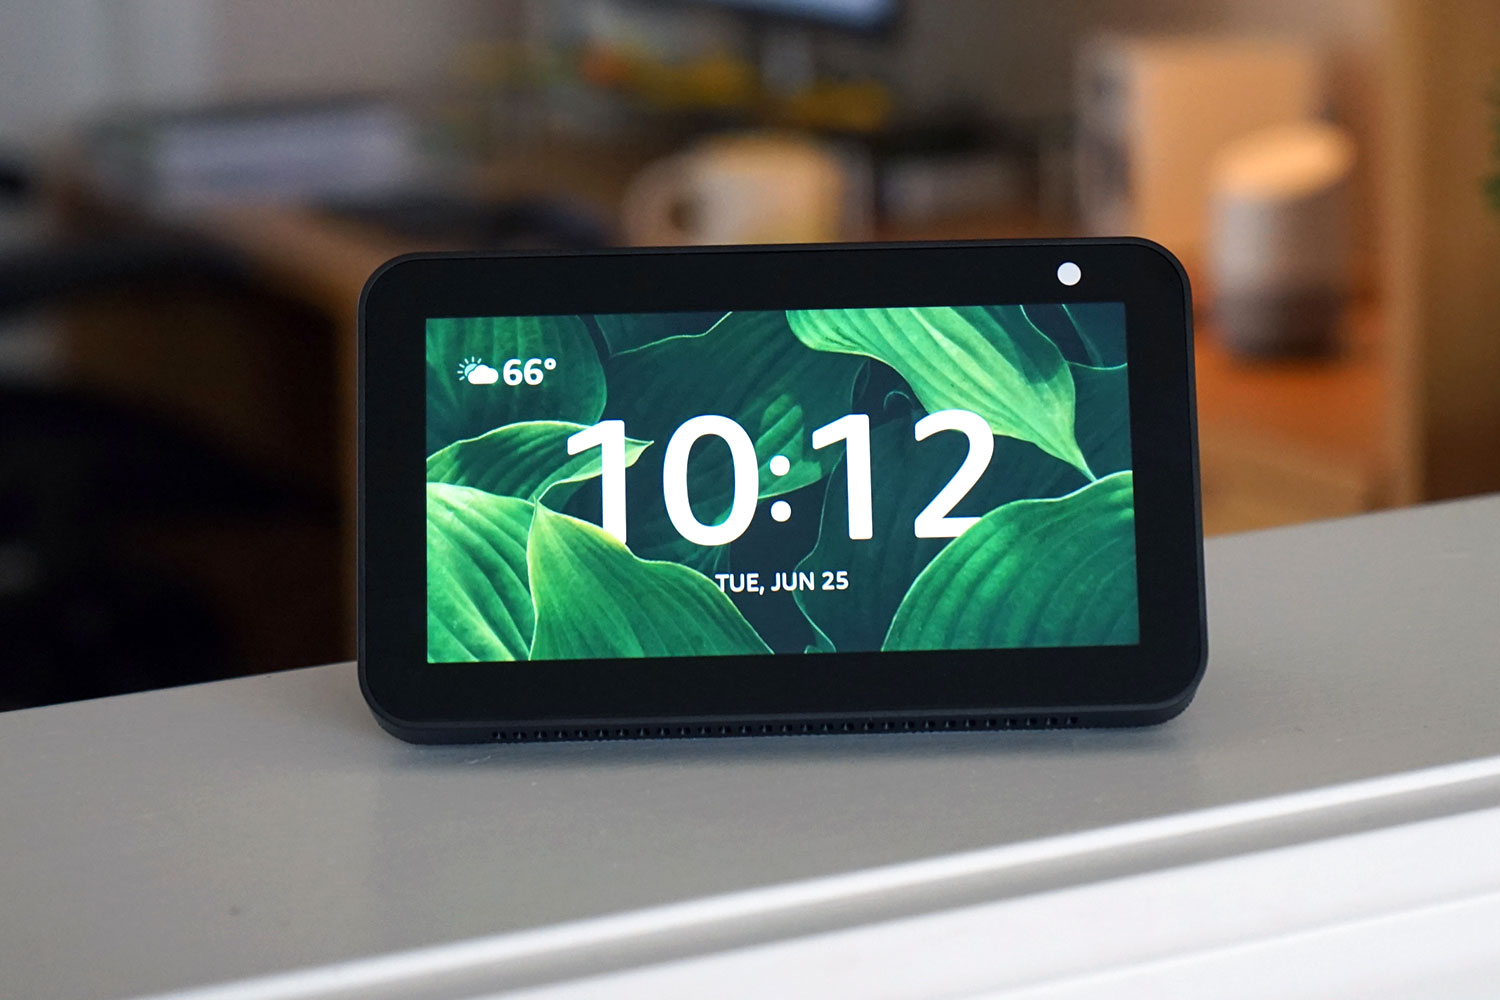 Echo Show (2nd Gen) review: A big step up from the original